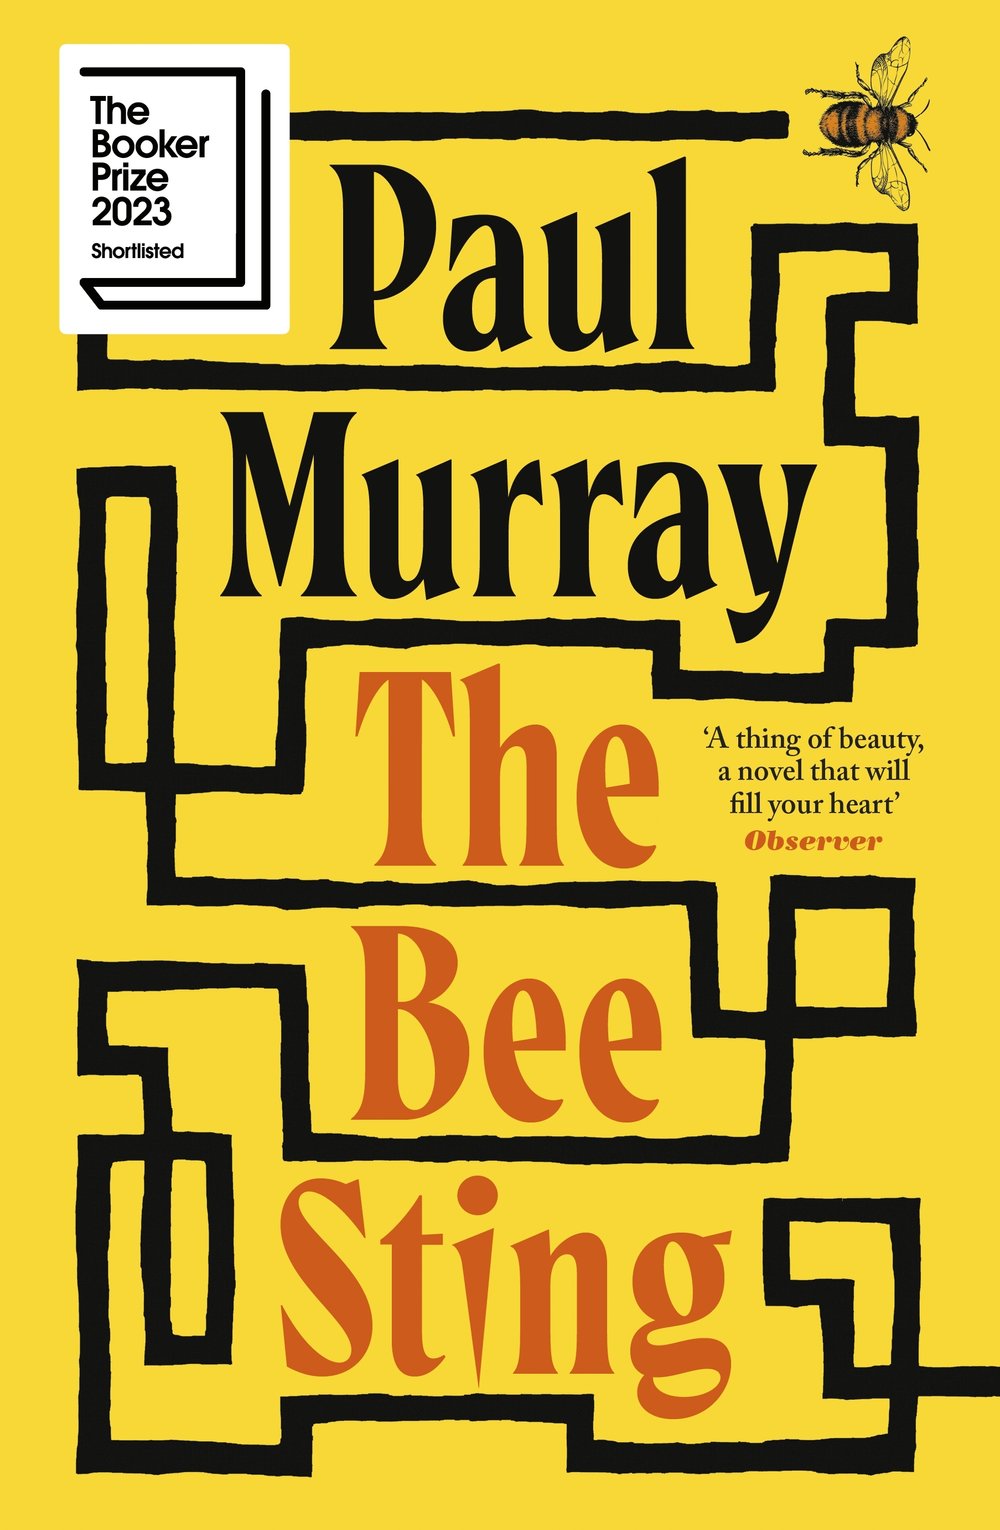 The Bee Sting by Paul Murray NZ Jacket Design.jpeg